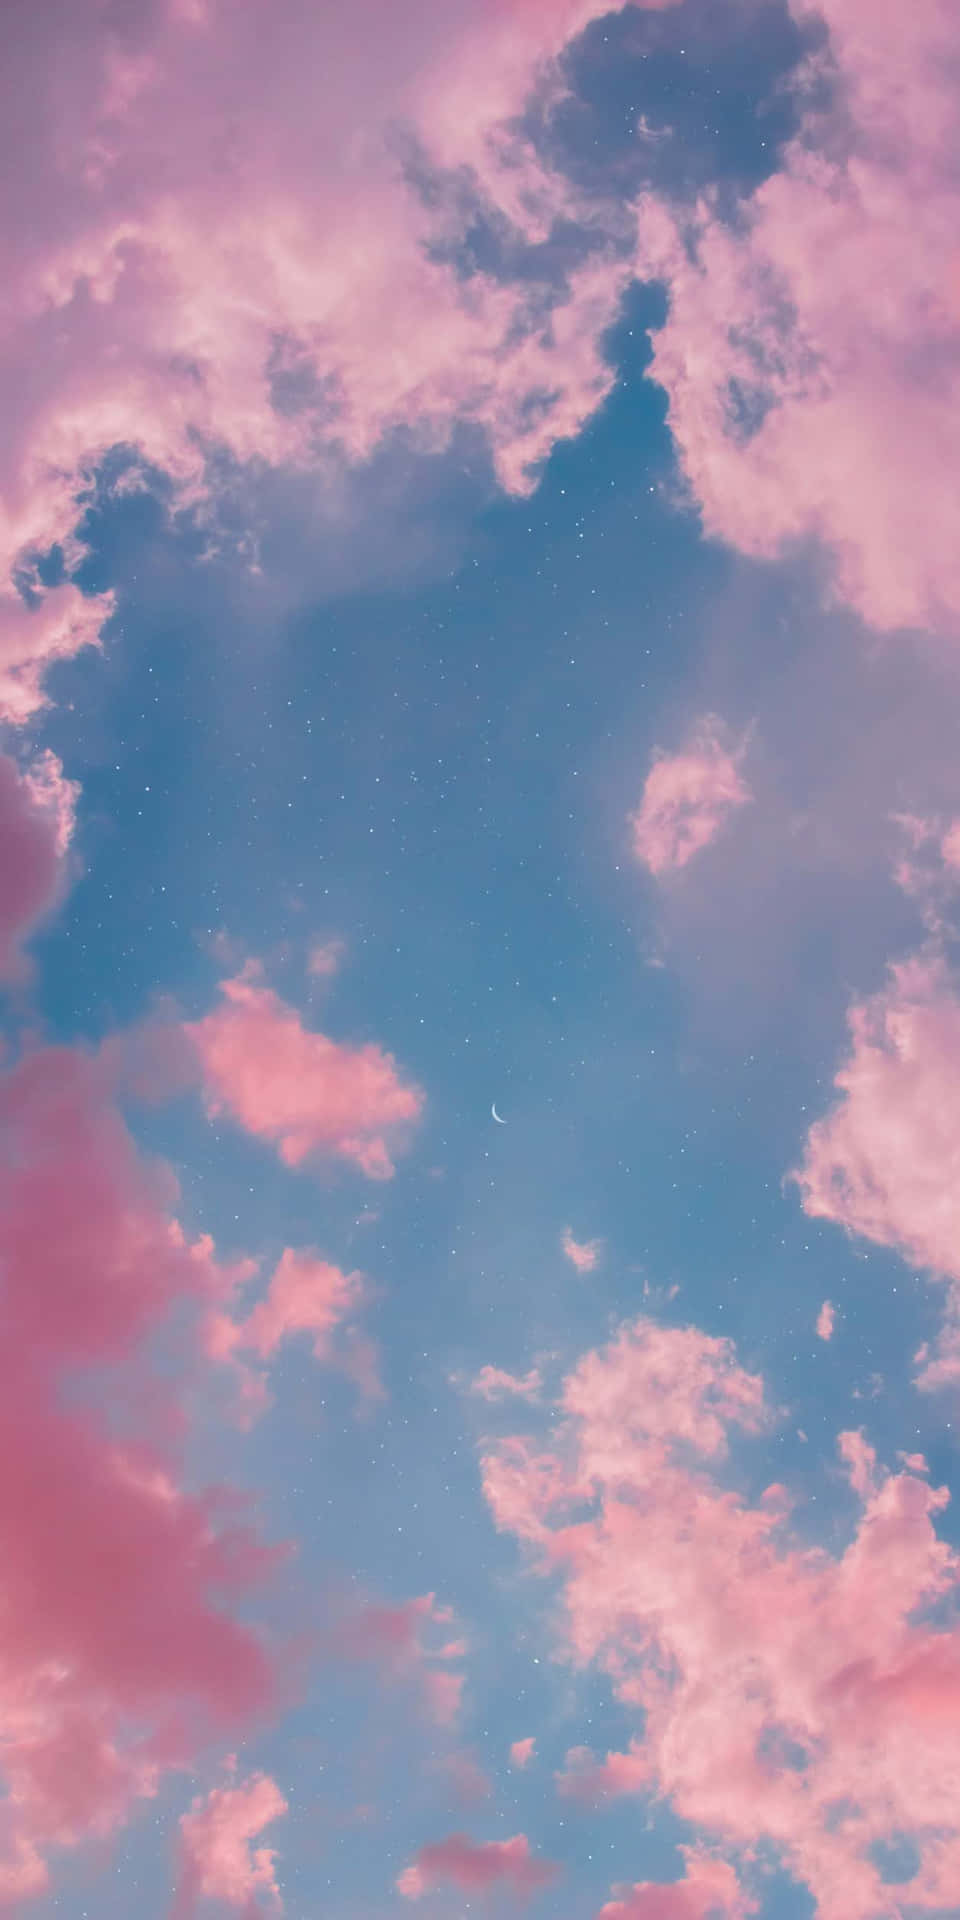 Download A Pink Sky With Clouds And A Moon | Wallpapers.com